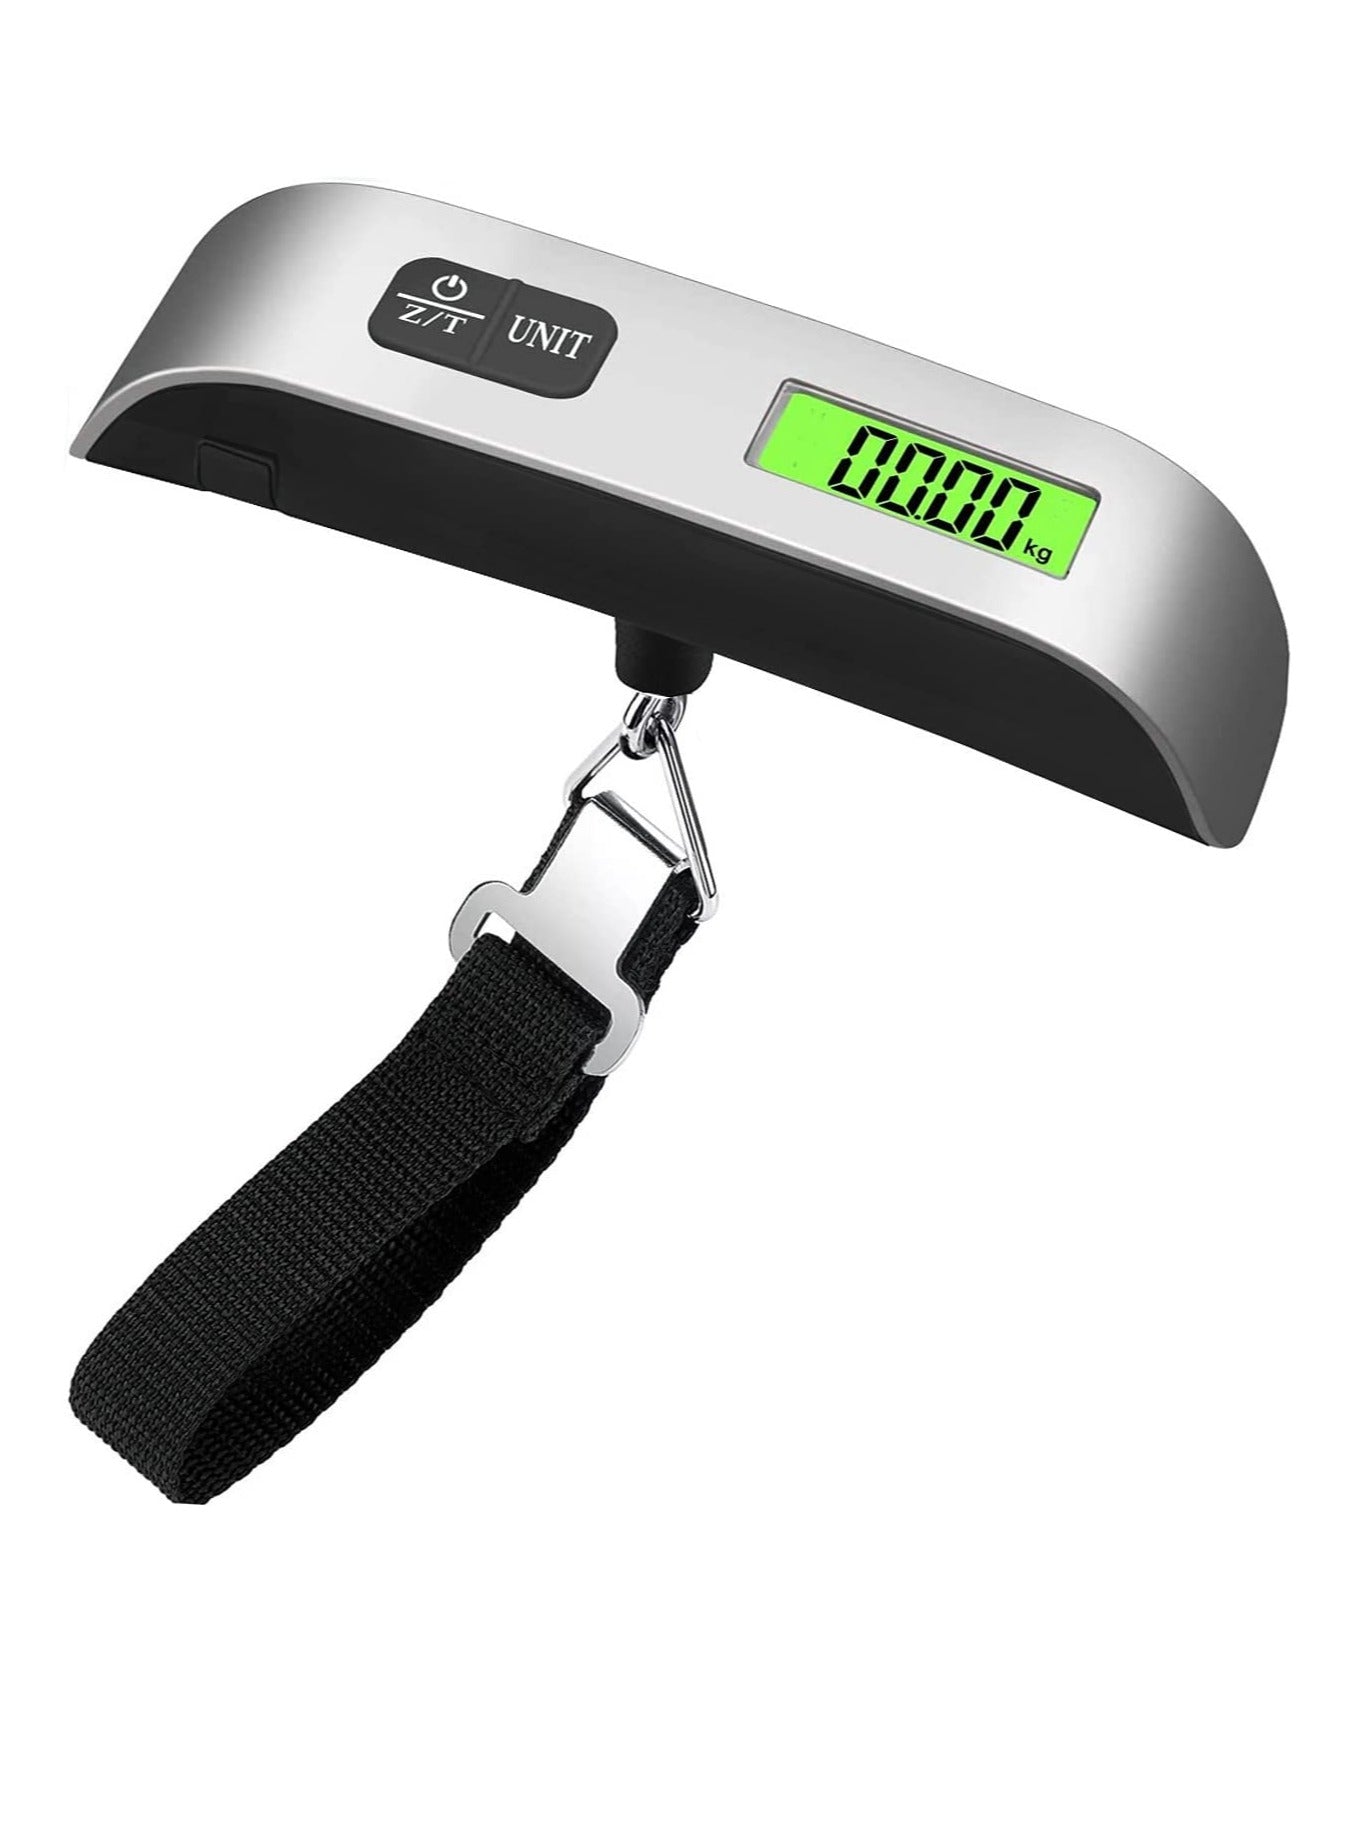 Electronics Travel Luggage Scale, Digital Luggage Weighing Scales for Suitcase with Temperature Reading 50 Kg Capacity (Silver)